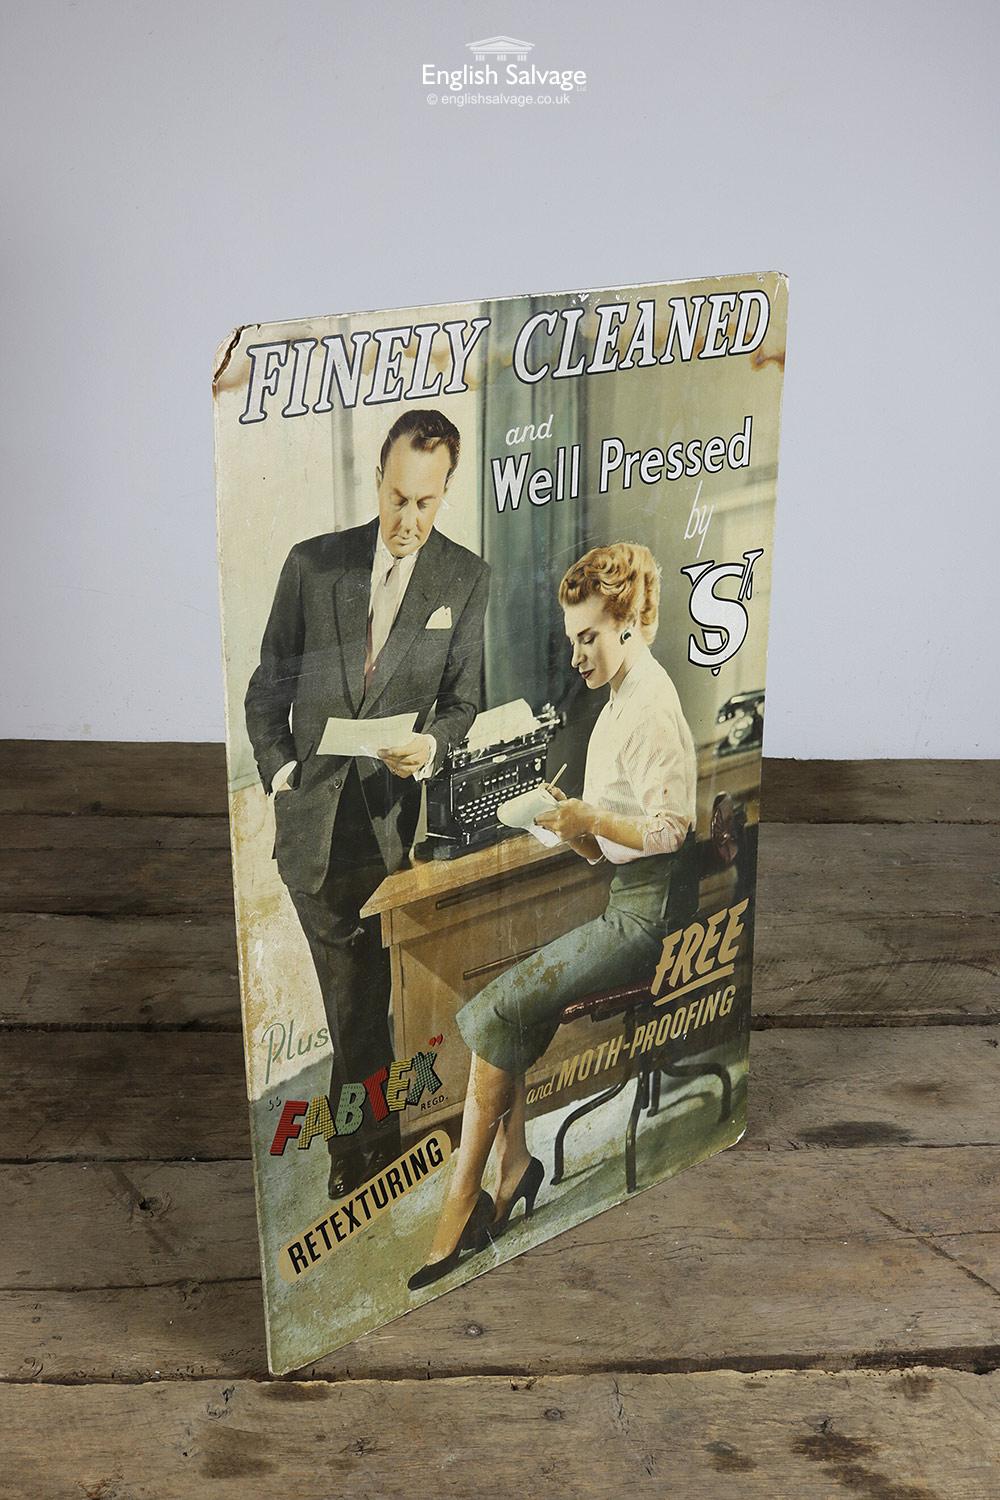 Vintage V S Fabtex Dry Cleaning Poster, 20th Century In Good Condition For Sale In London, GB